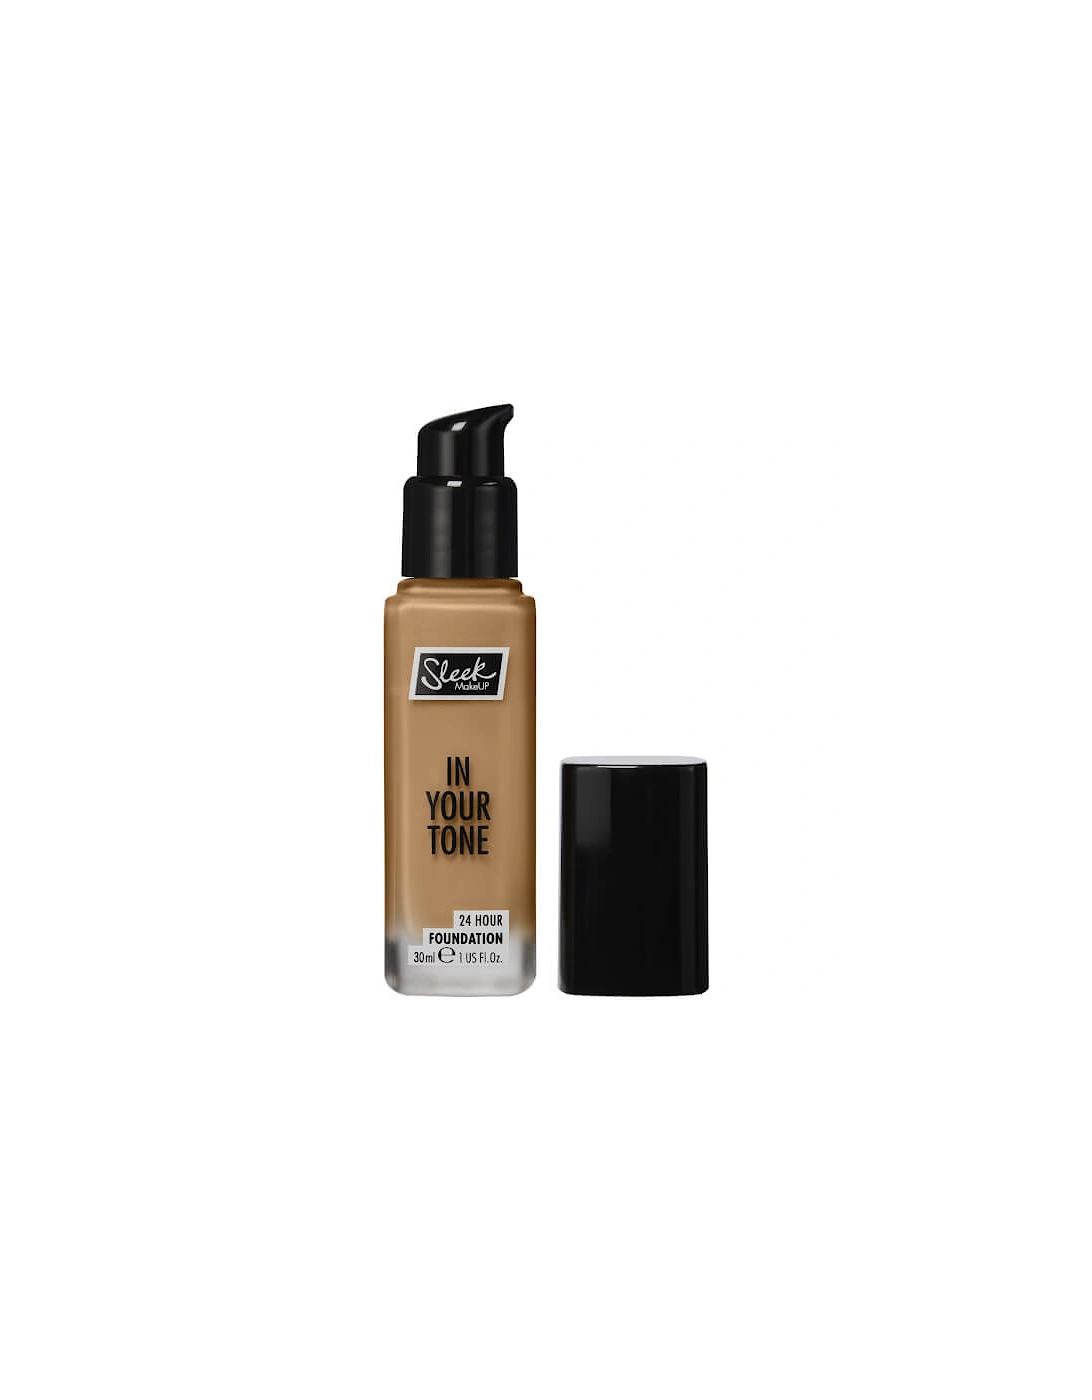 in Your Tone 24 Hour Foundation - 8W, 2 of 1